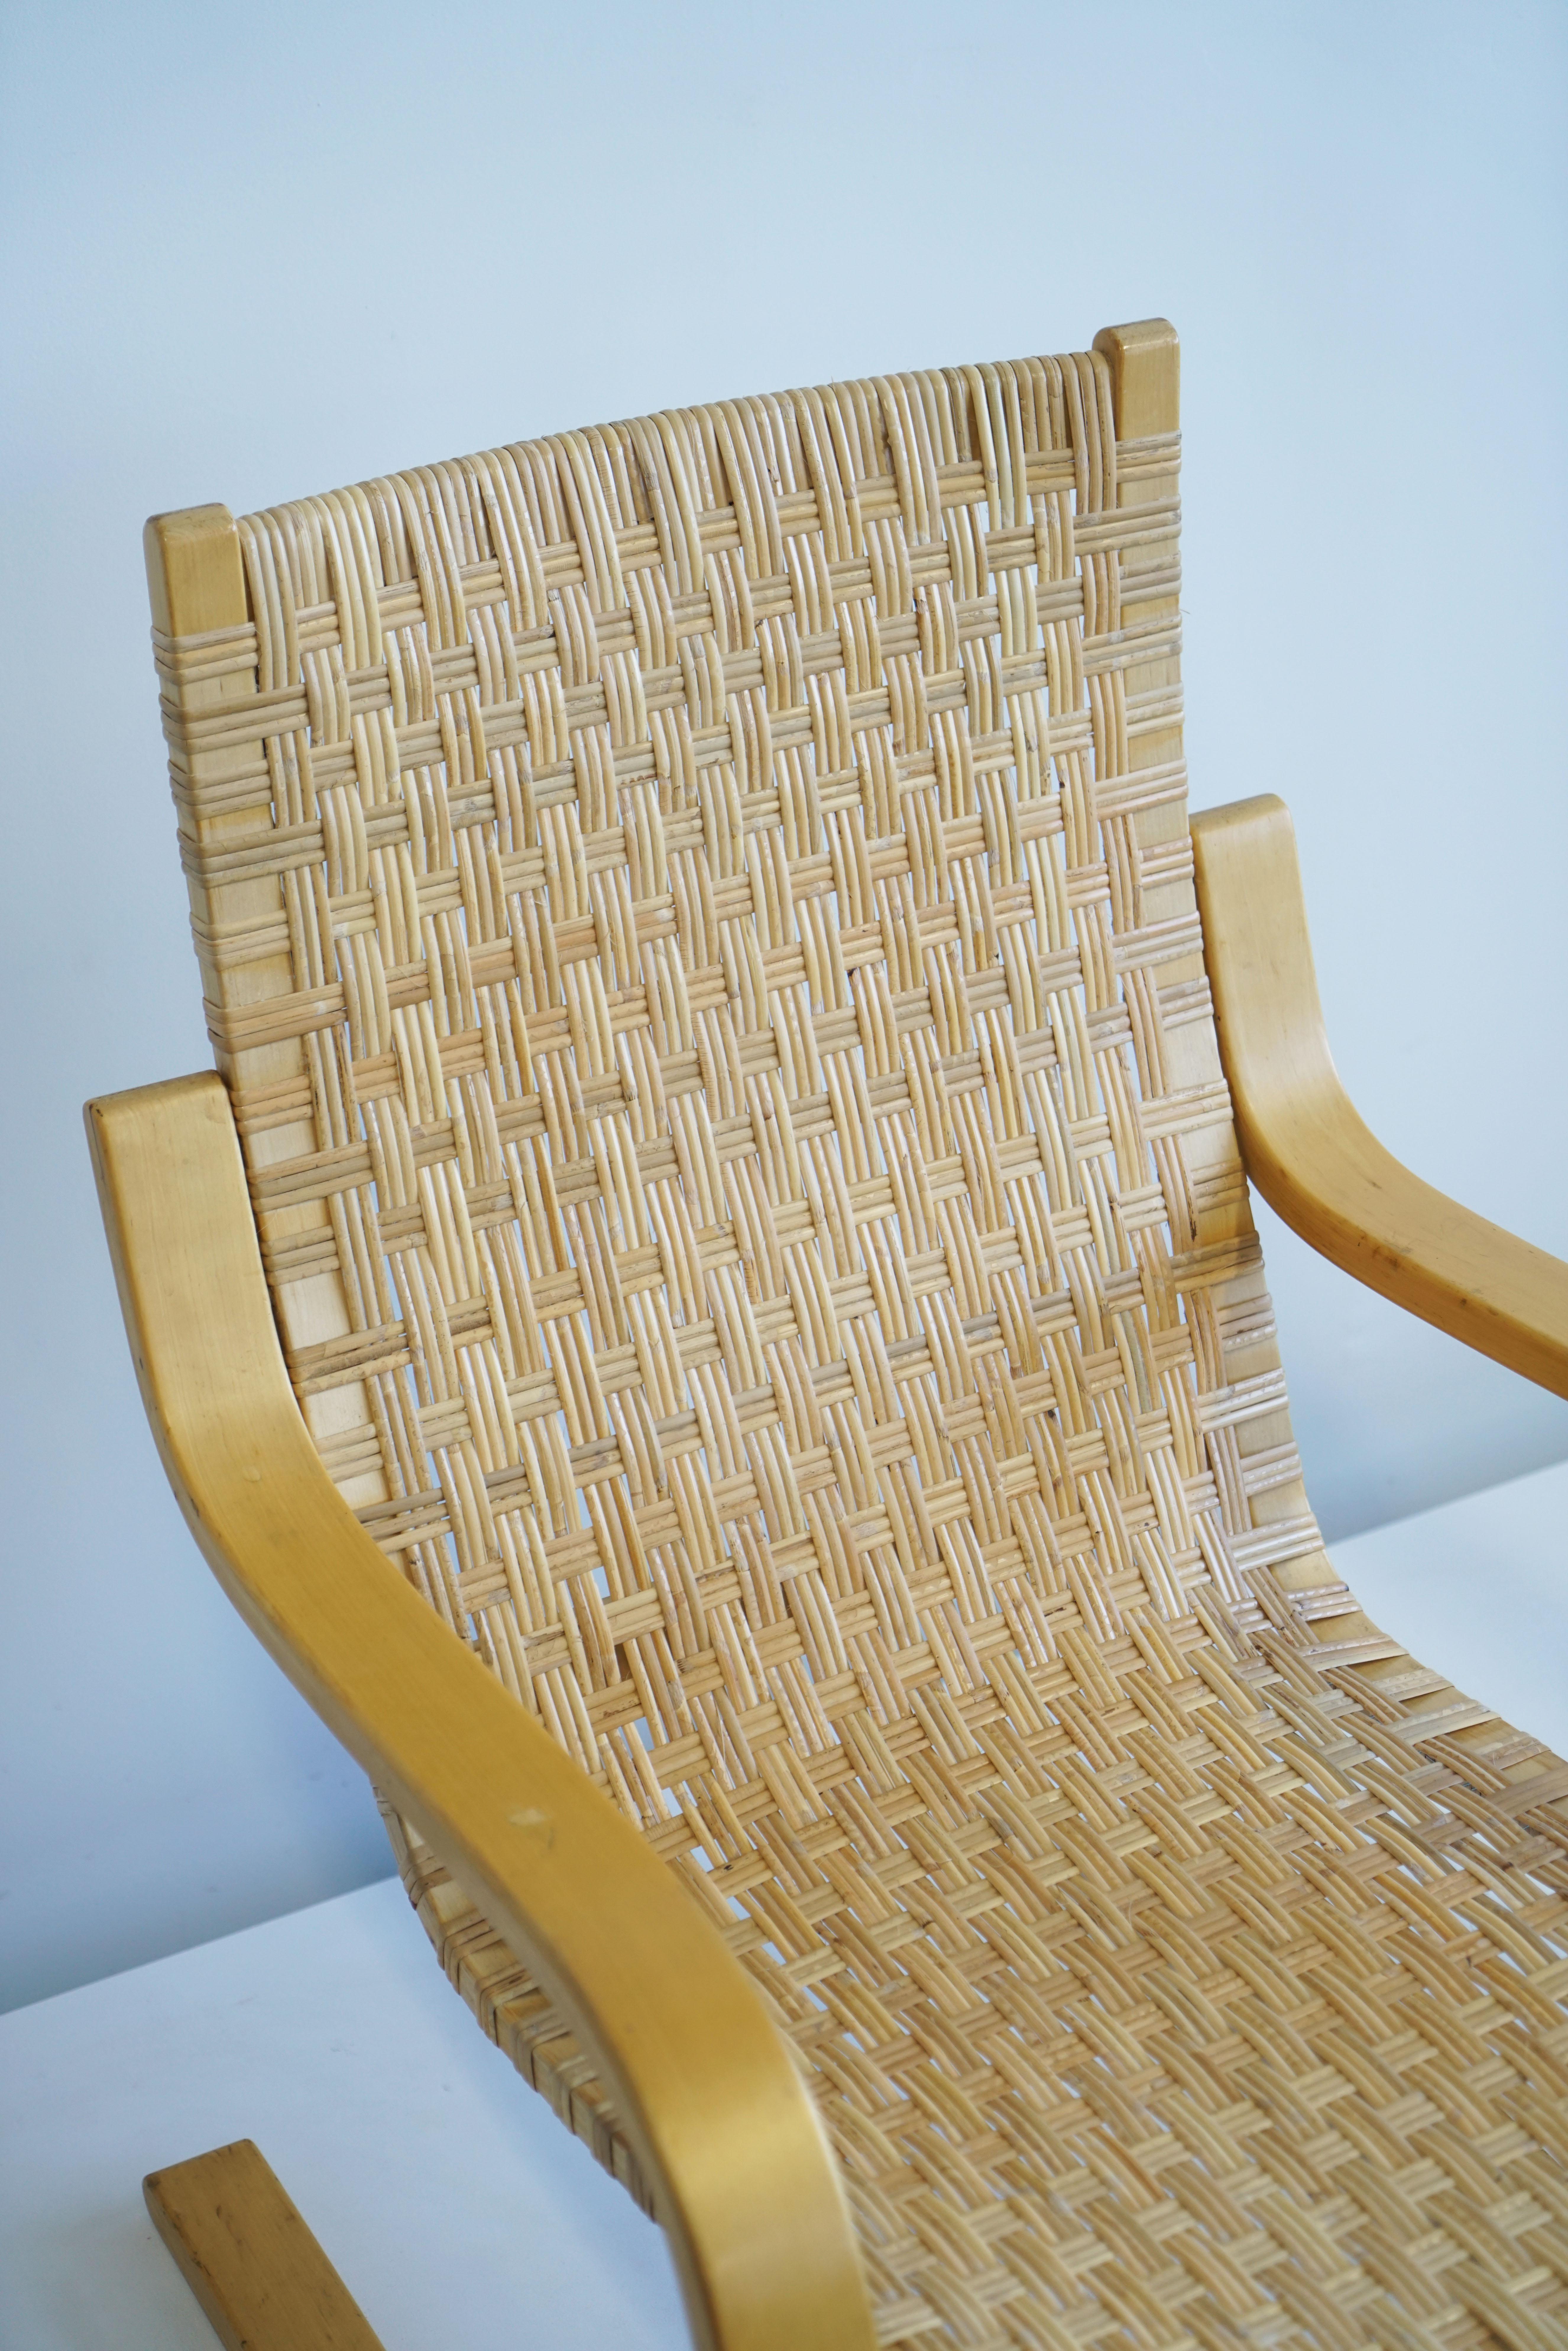 Caning Pair of Alvar Aalto Cantilever Chairs Model 406 by Artek in Birch Cane Webbing For Sale